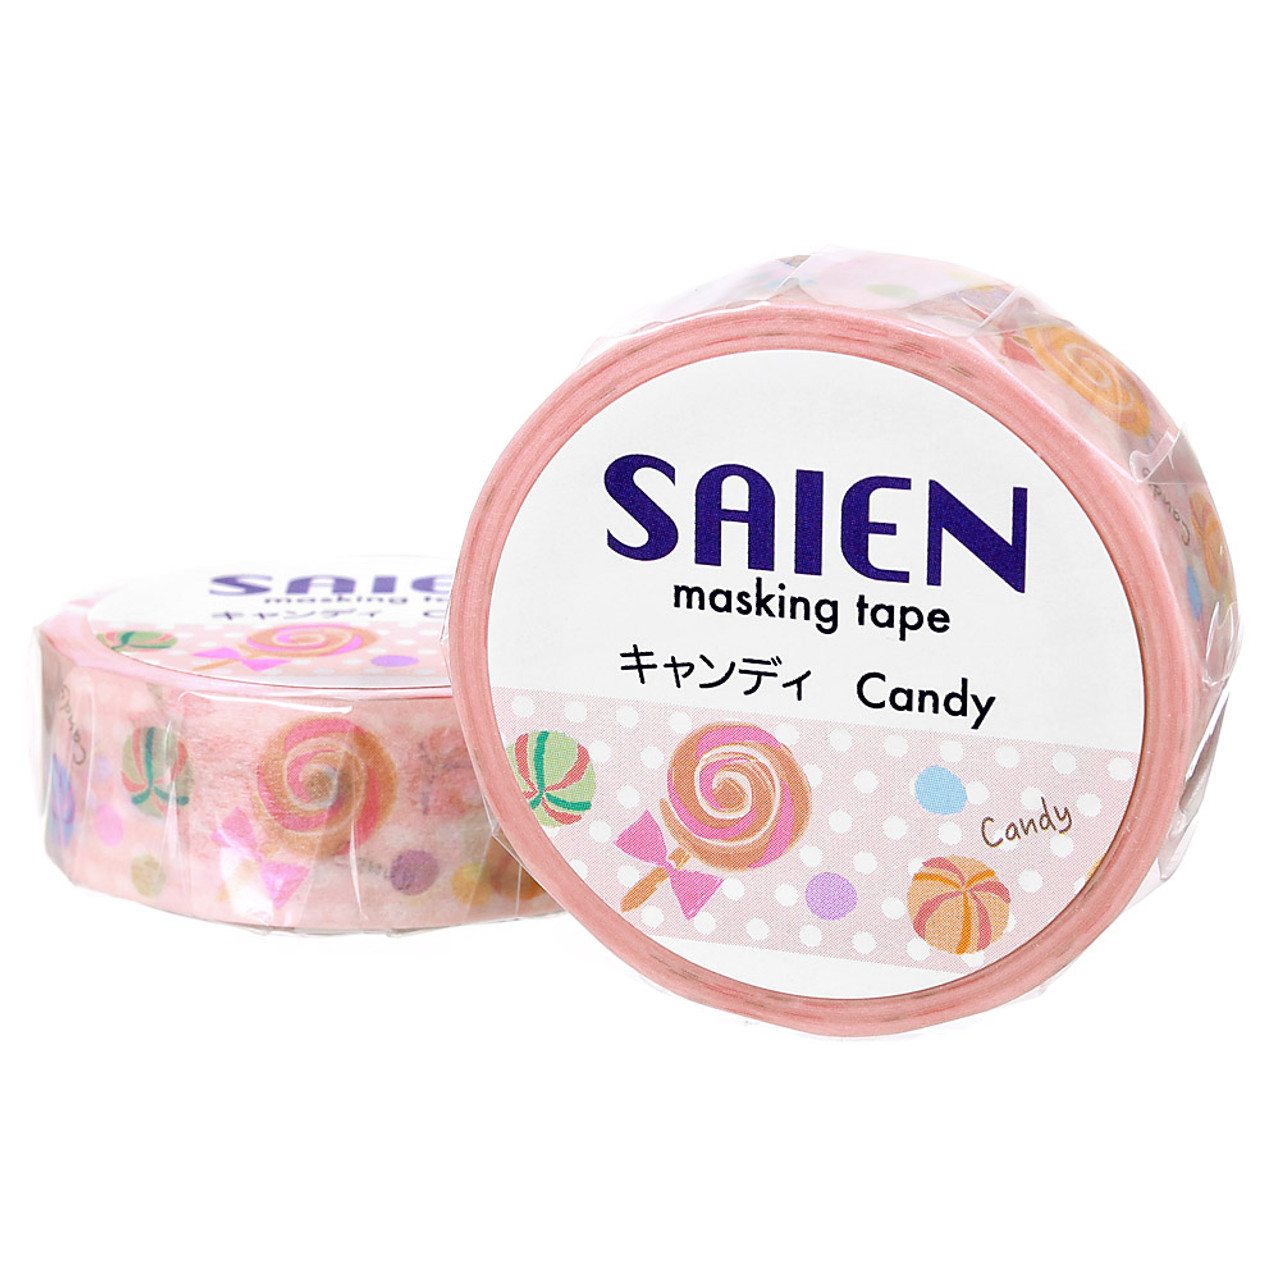 Saien Washi Masking Tape - Candy ( Front View )